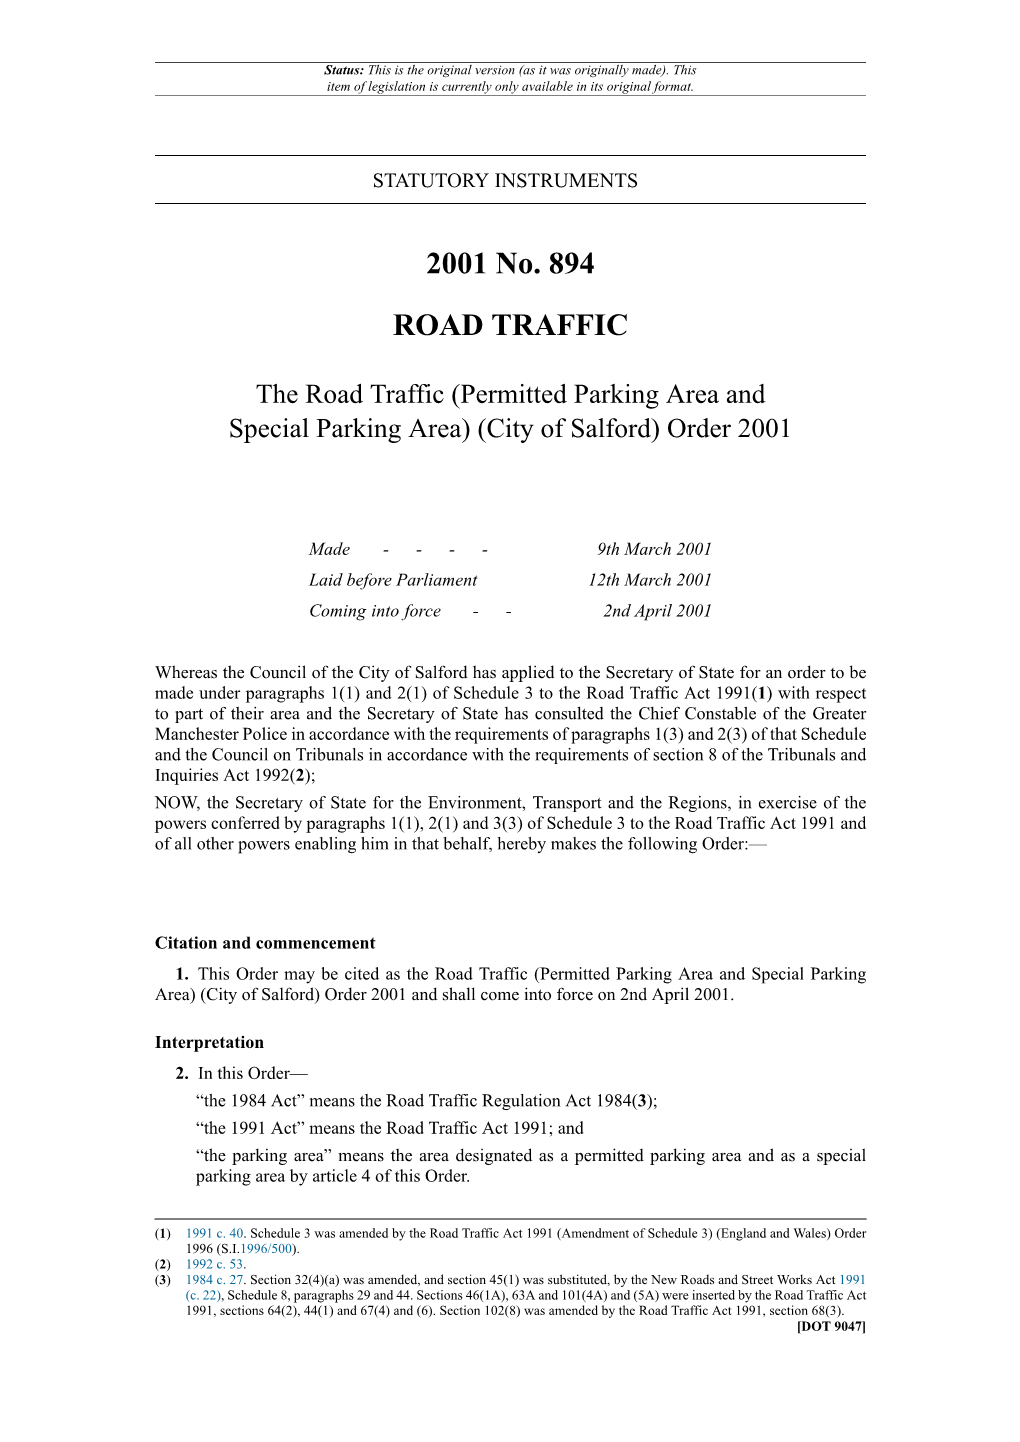 The Road Traffic (Permitted Parking Area and Special Parking Area) (City of Salford) Order 2001